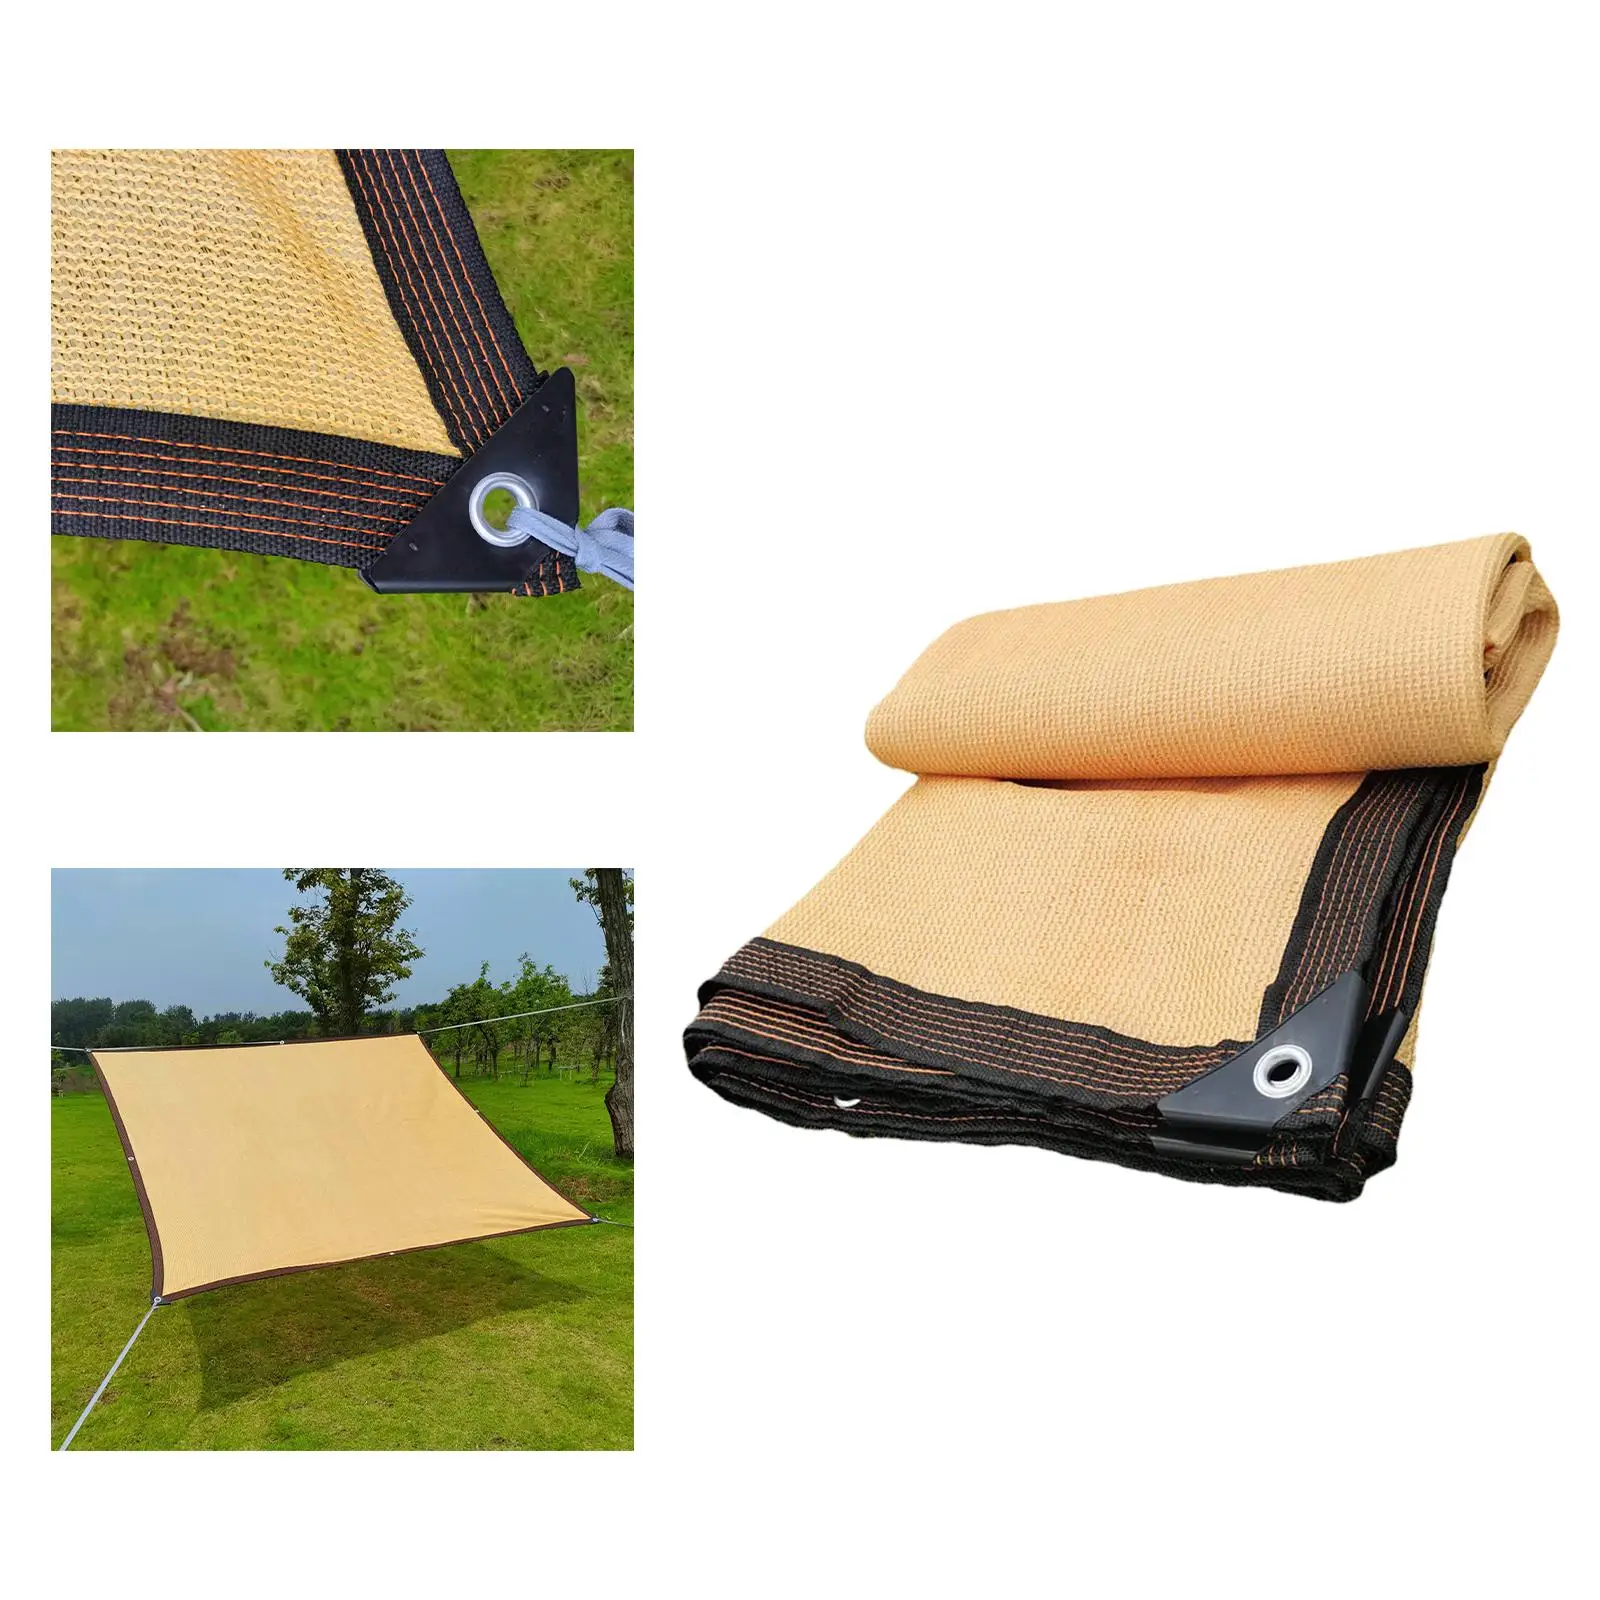 Patio Backyard Mesh  Netting Thickening Weather Resistant Shadecloth for Shelter, Outdoor Facility and Activities